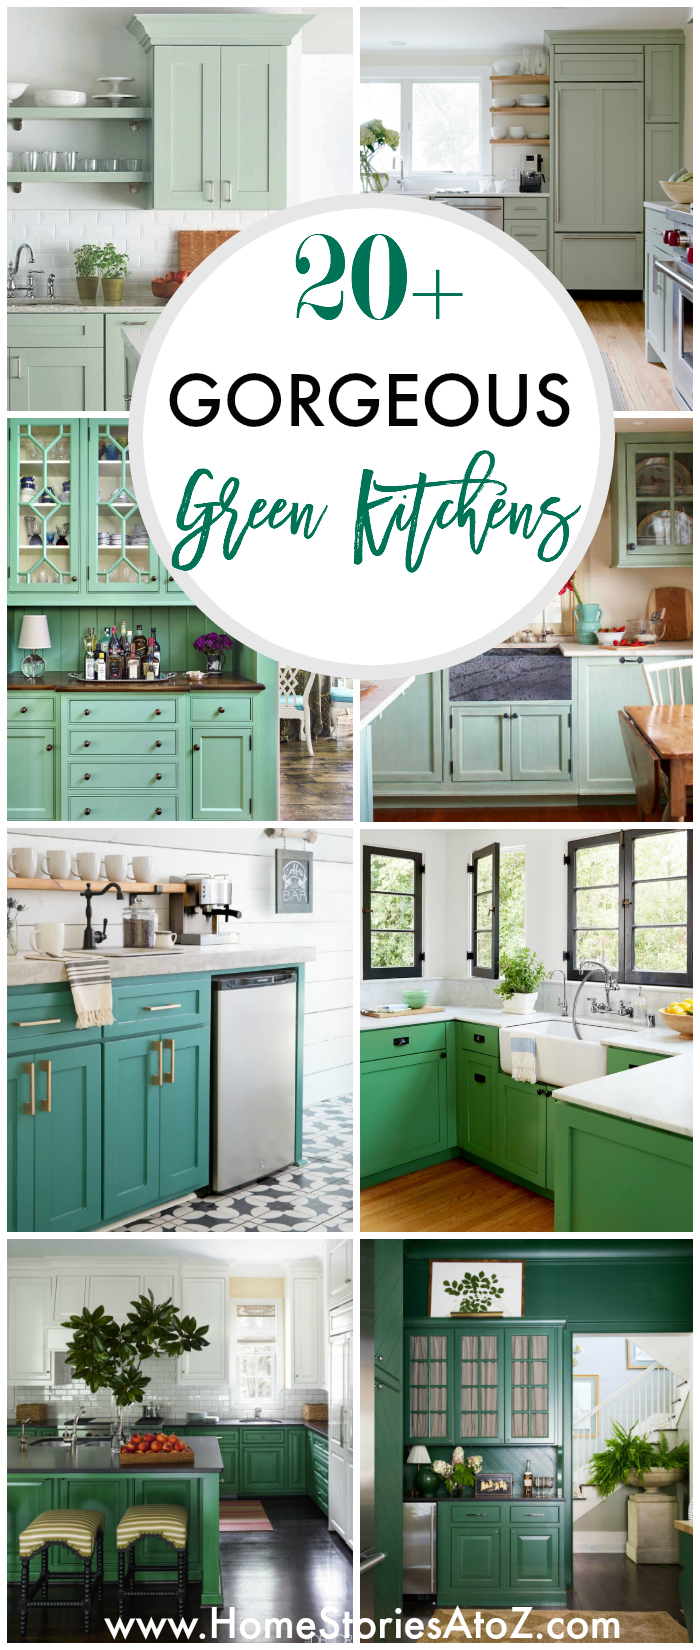 20+ GORGEOUS GREEN KITCHEN CABINET IDEAS   Home Stories A to Z